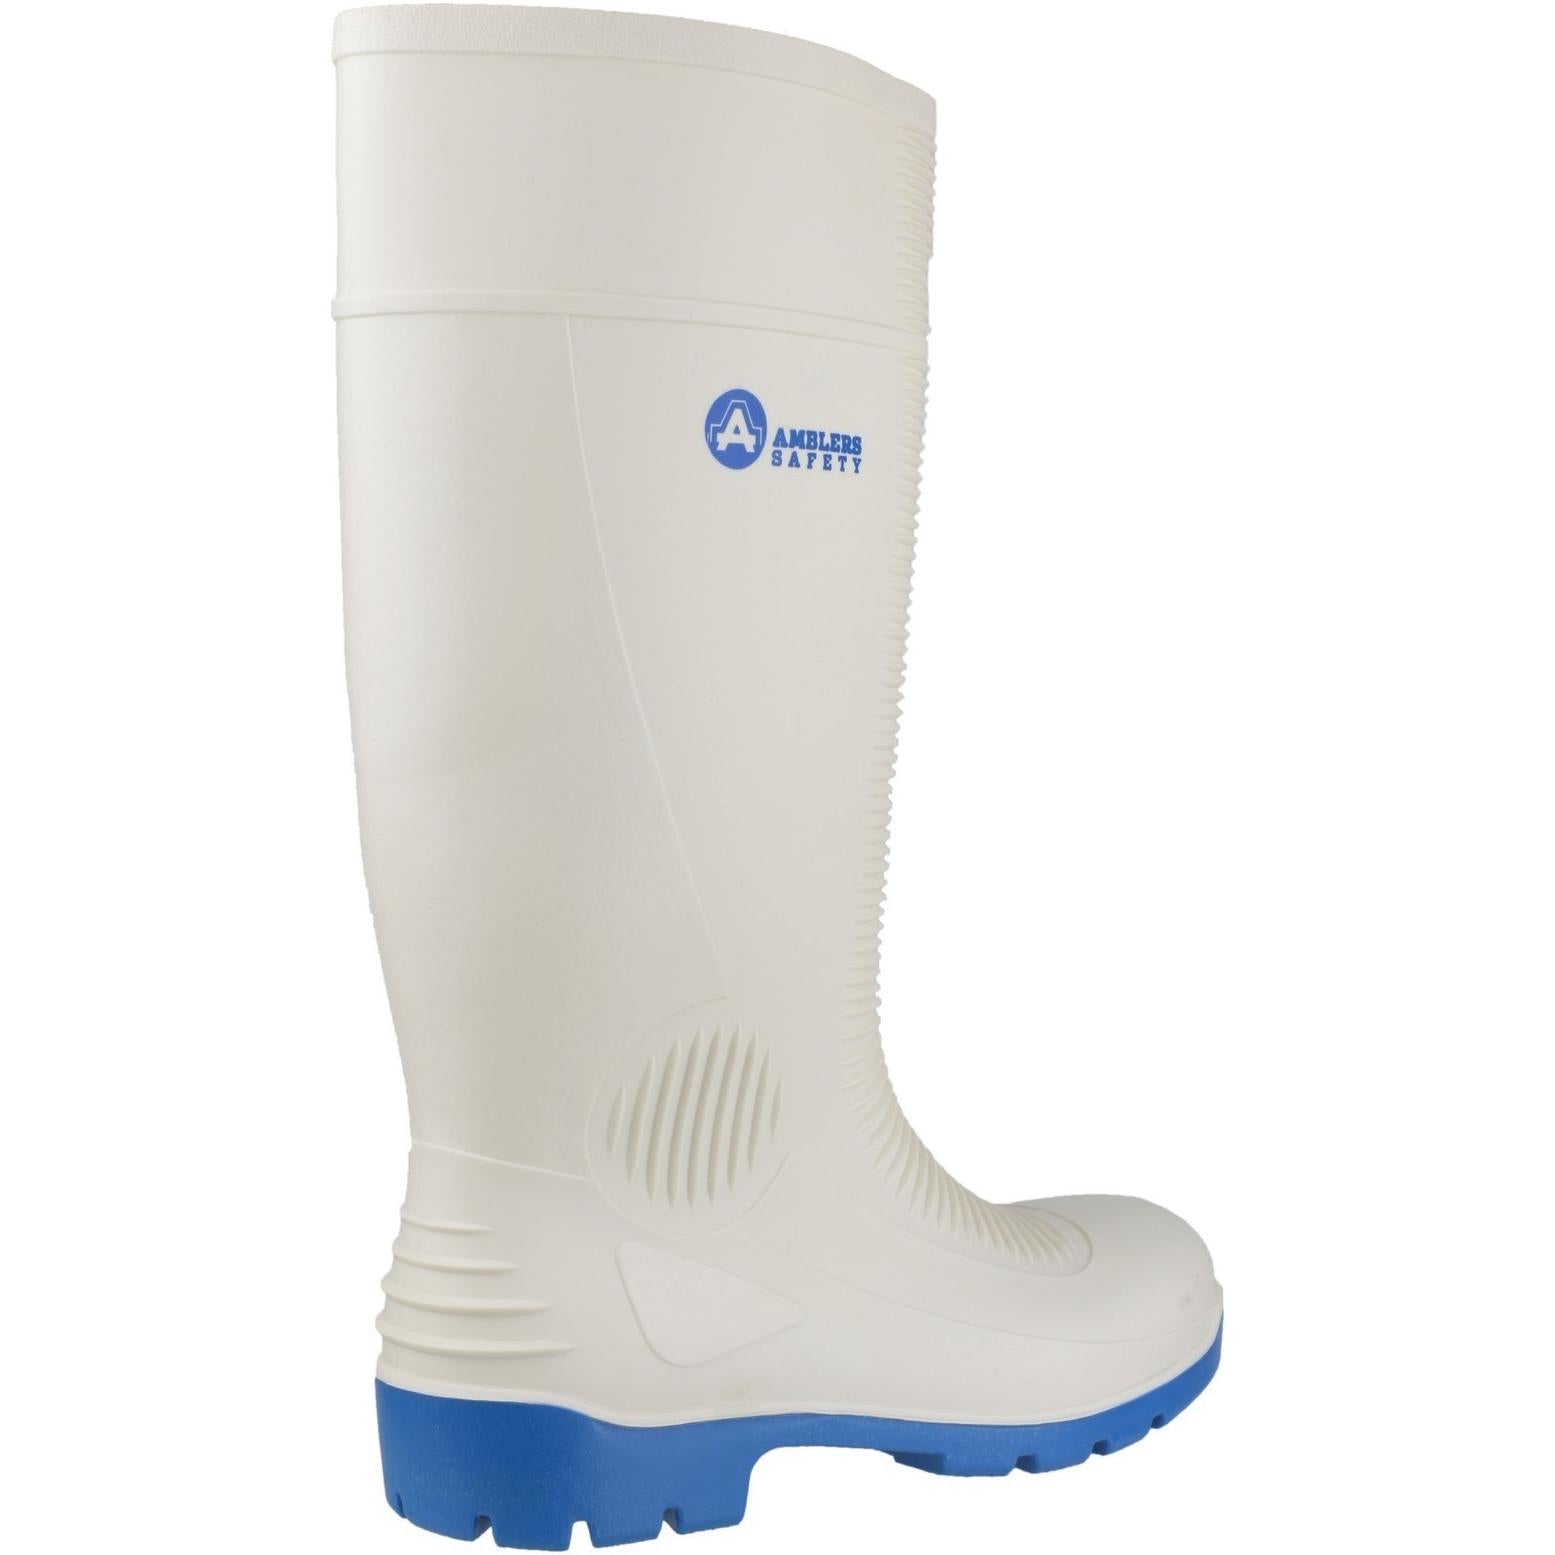 Amblers Safety FS98 Steel Toe Food Safety Wellington Boots